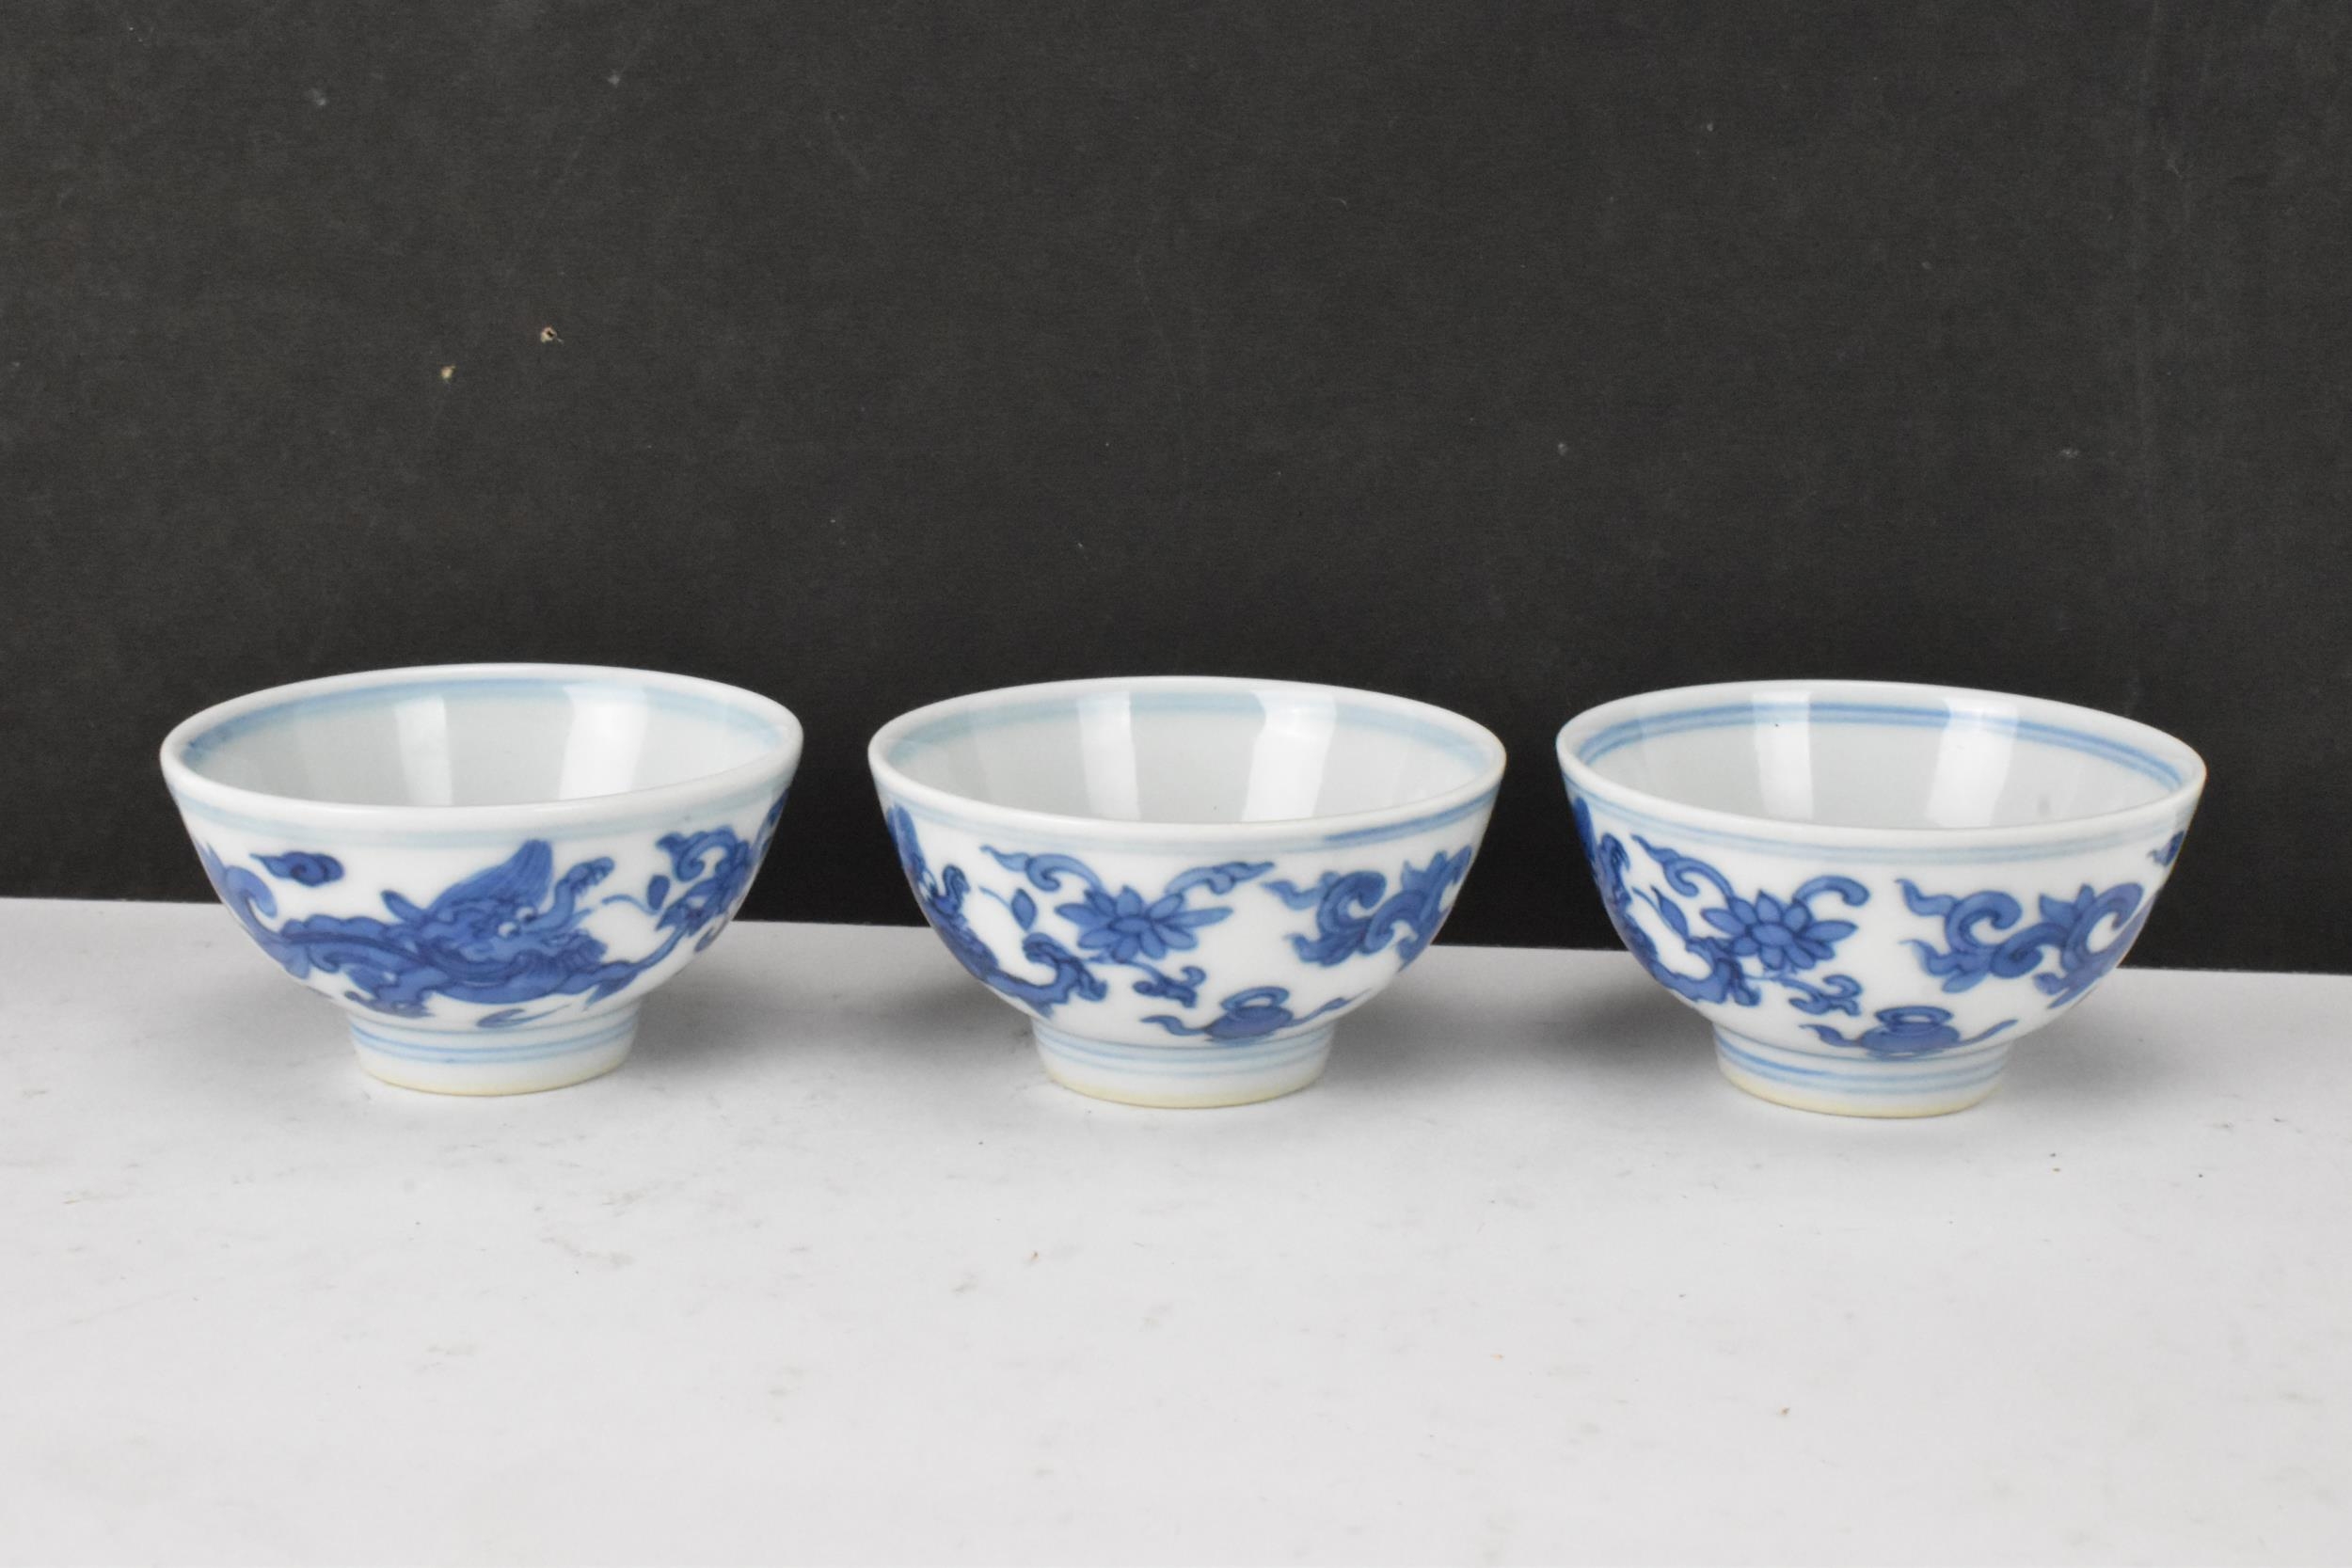 Three Chinese 20th century blue and white bowls, decorated with dragons and interiors with central - Image 3 of 9